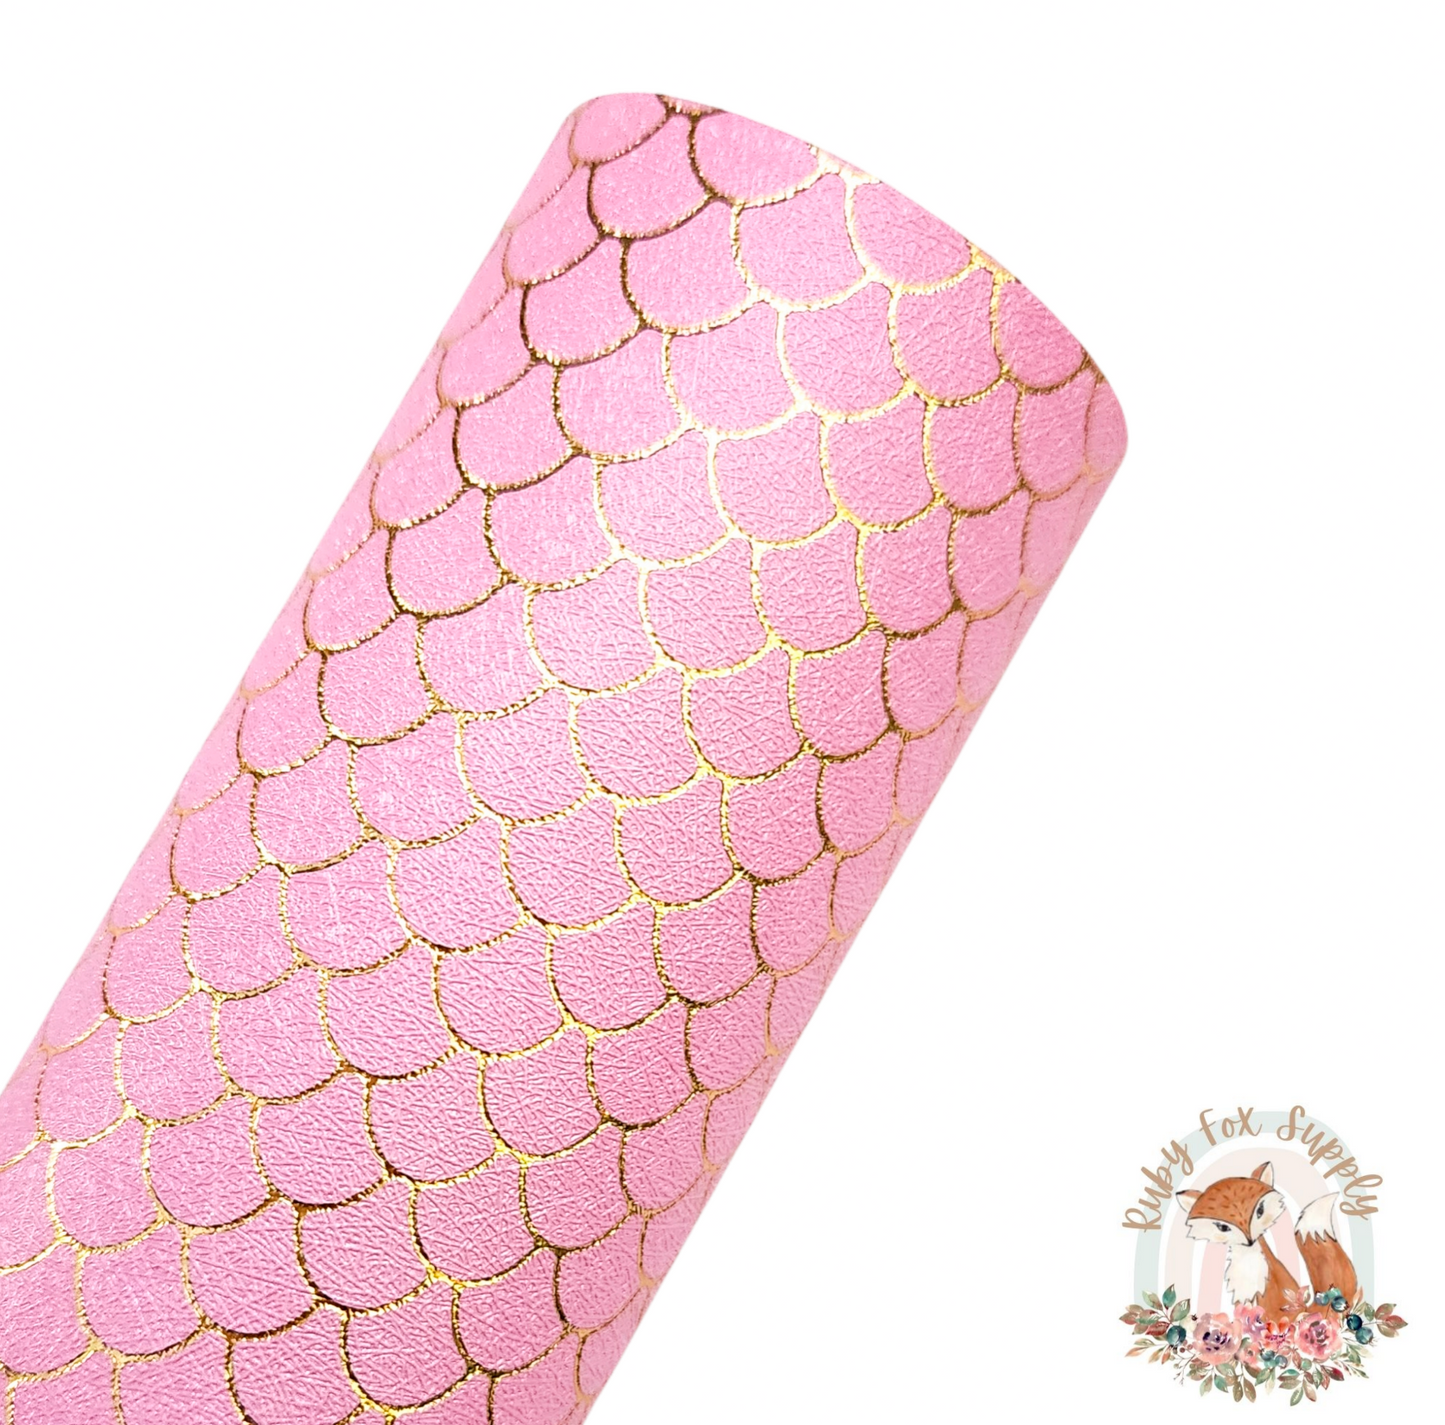 Light Pink Gold Foil Mermaid Scales 9x12 faux leather sheet